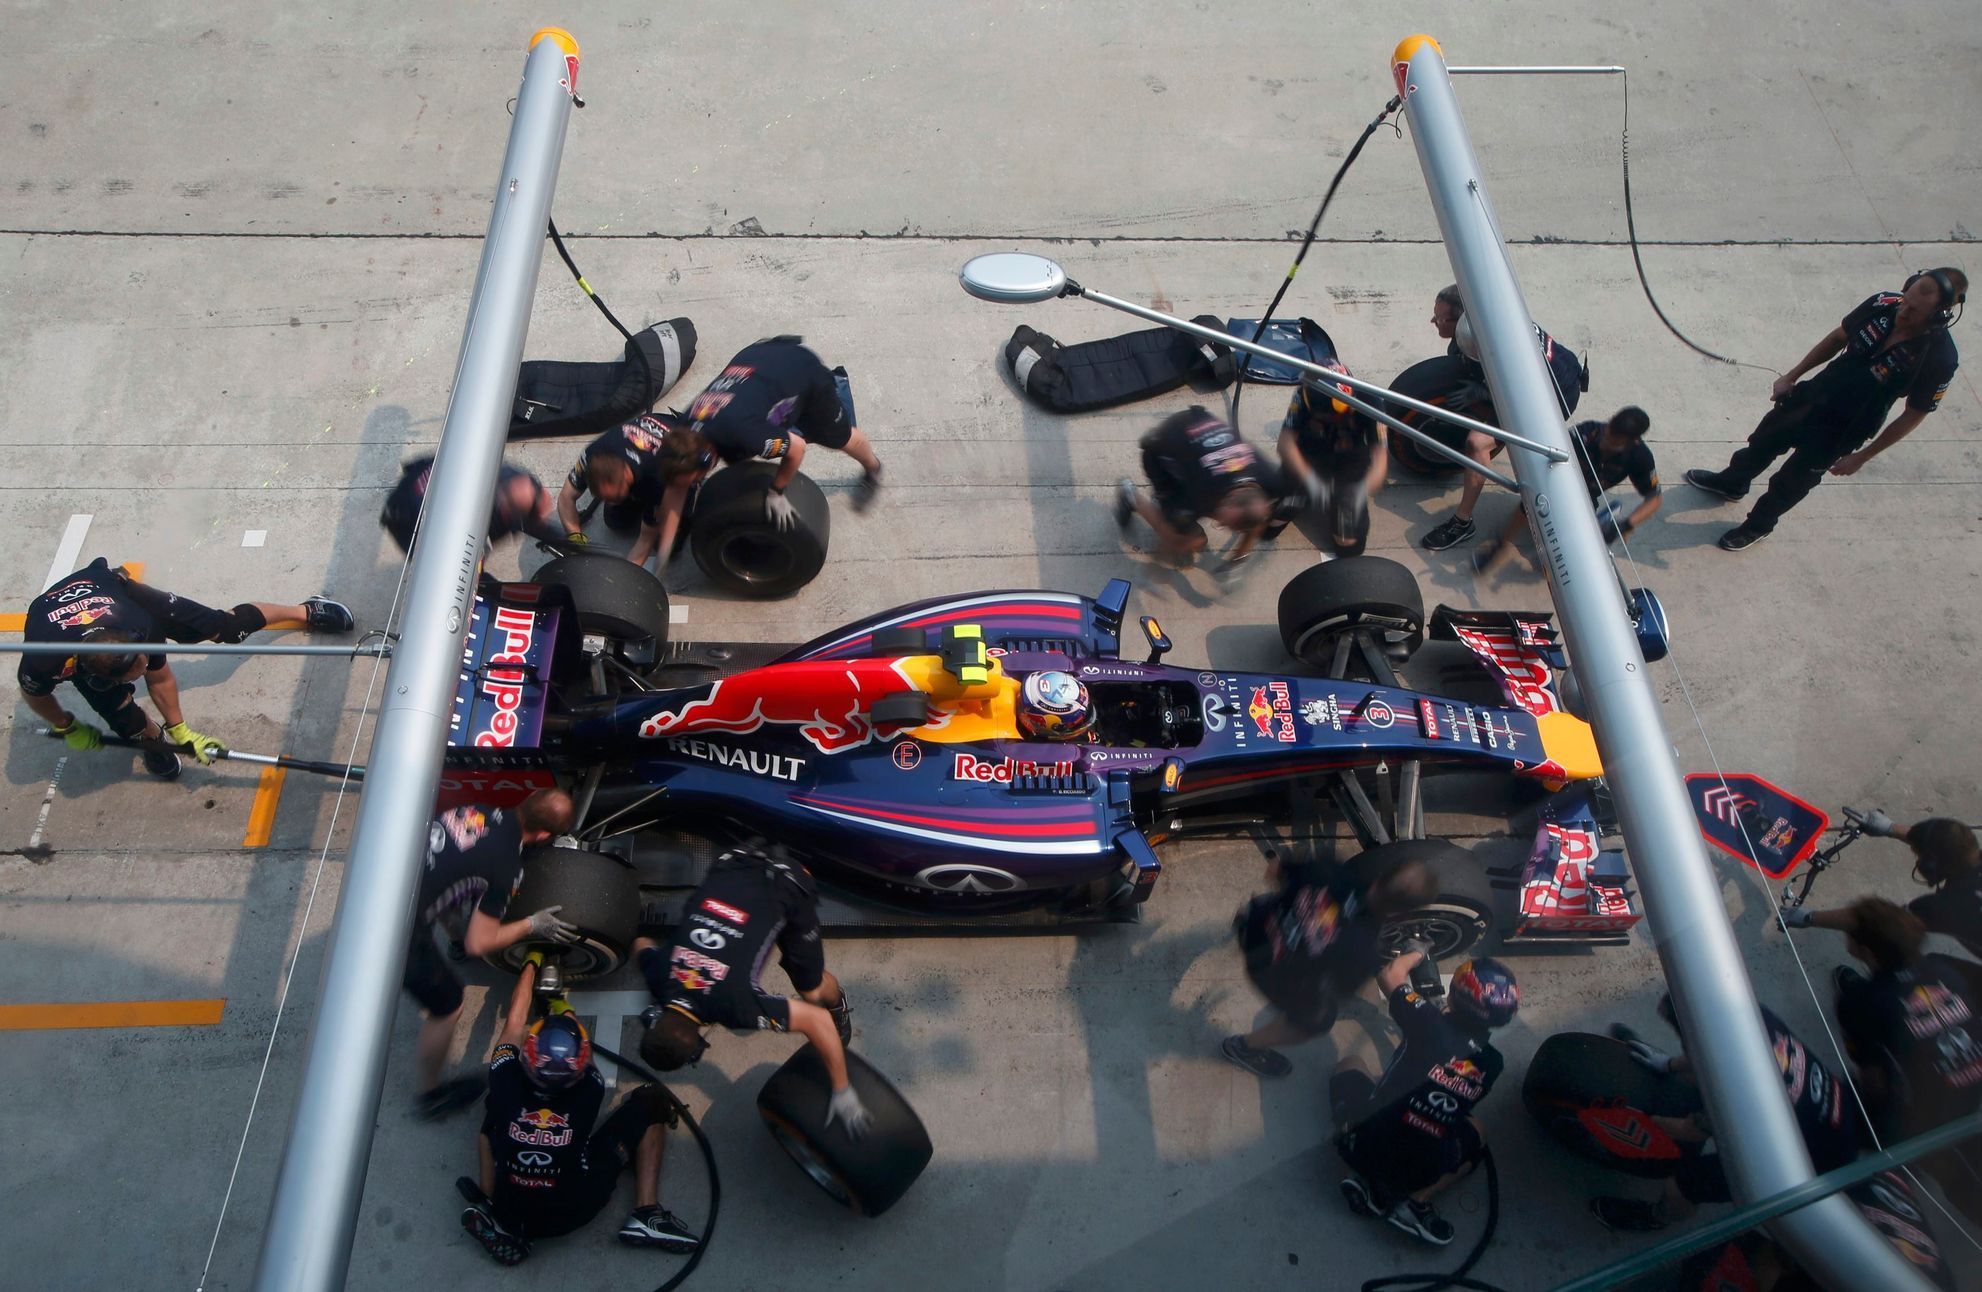 Red Bull Formula One driver Ricciardo pits during the second practice session of the Malaysian F1 Grand Prix at Sepang International Circuit outside Kuala Lumpur